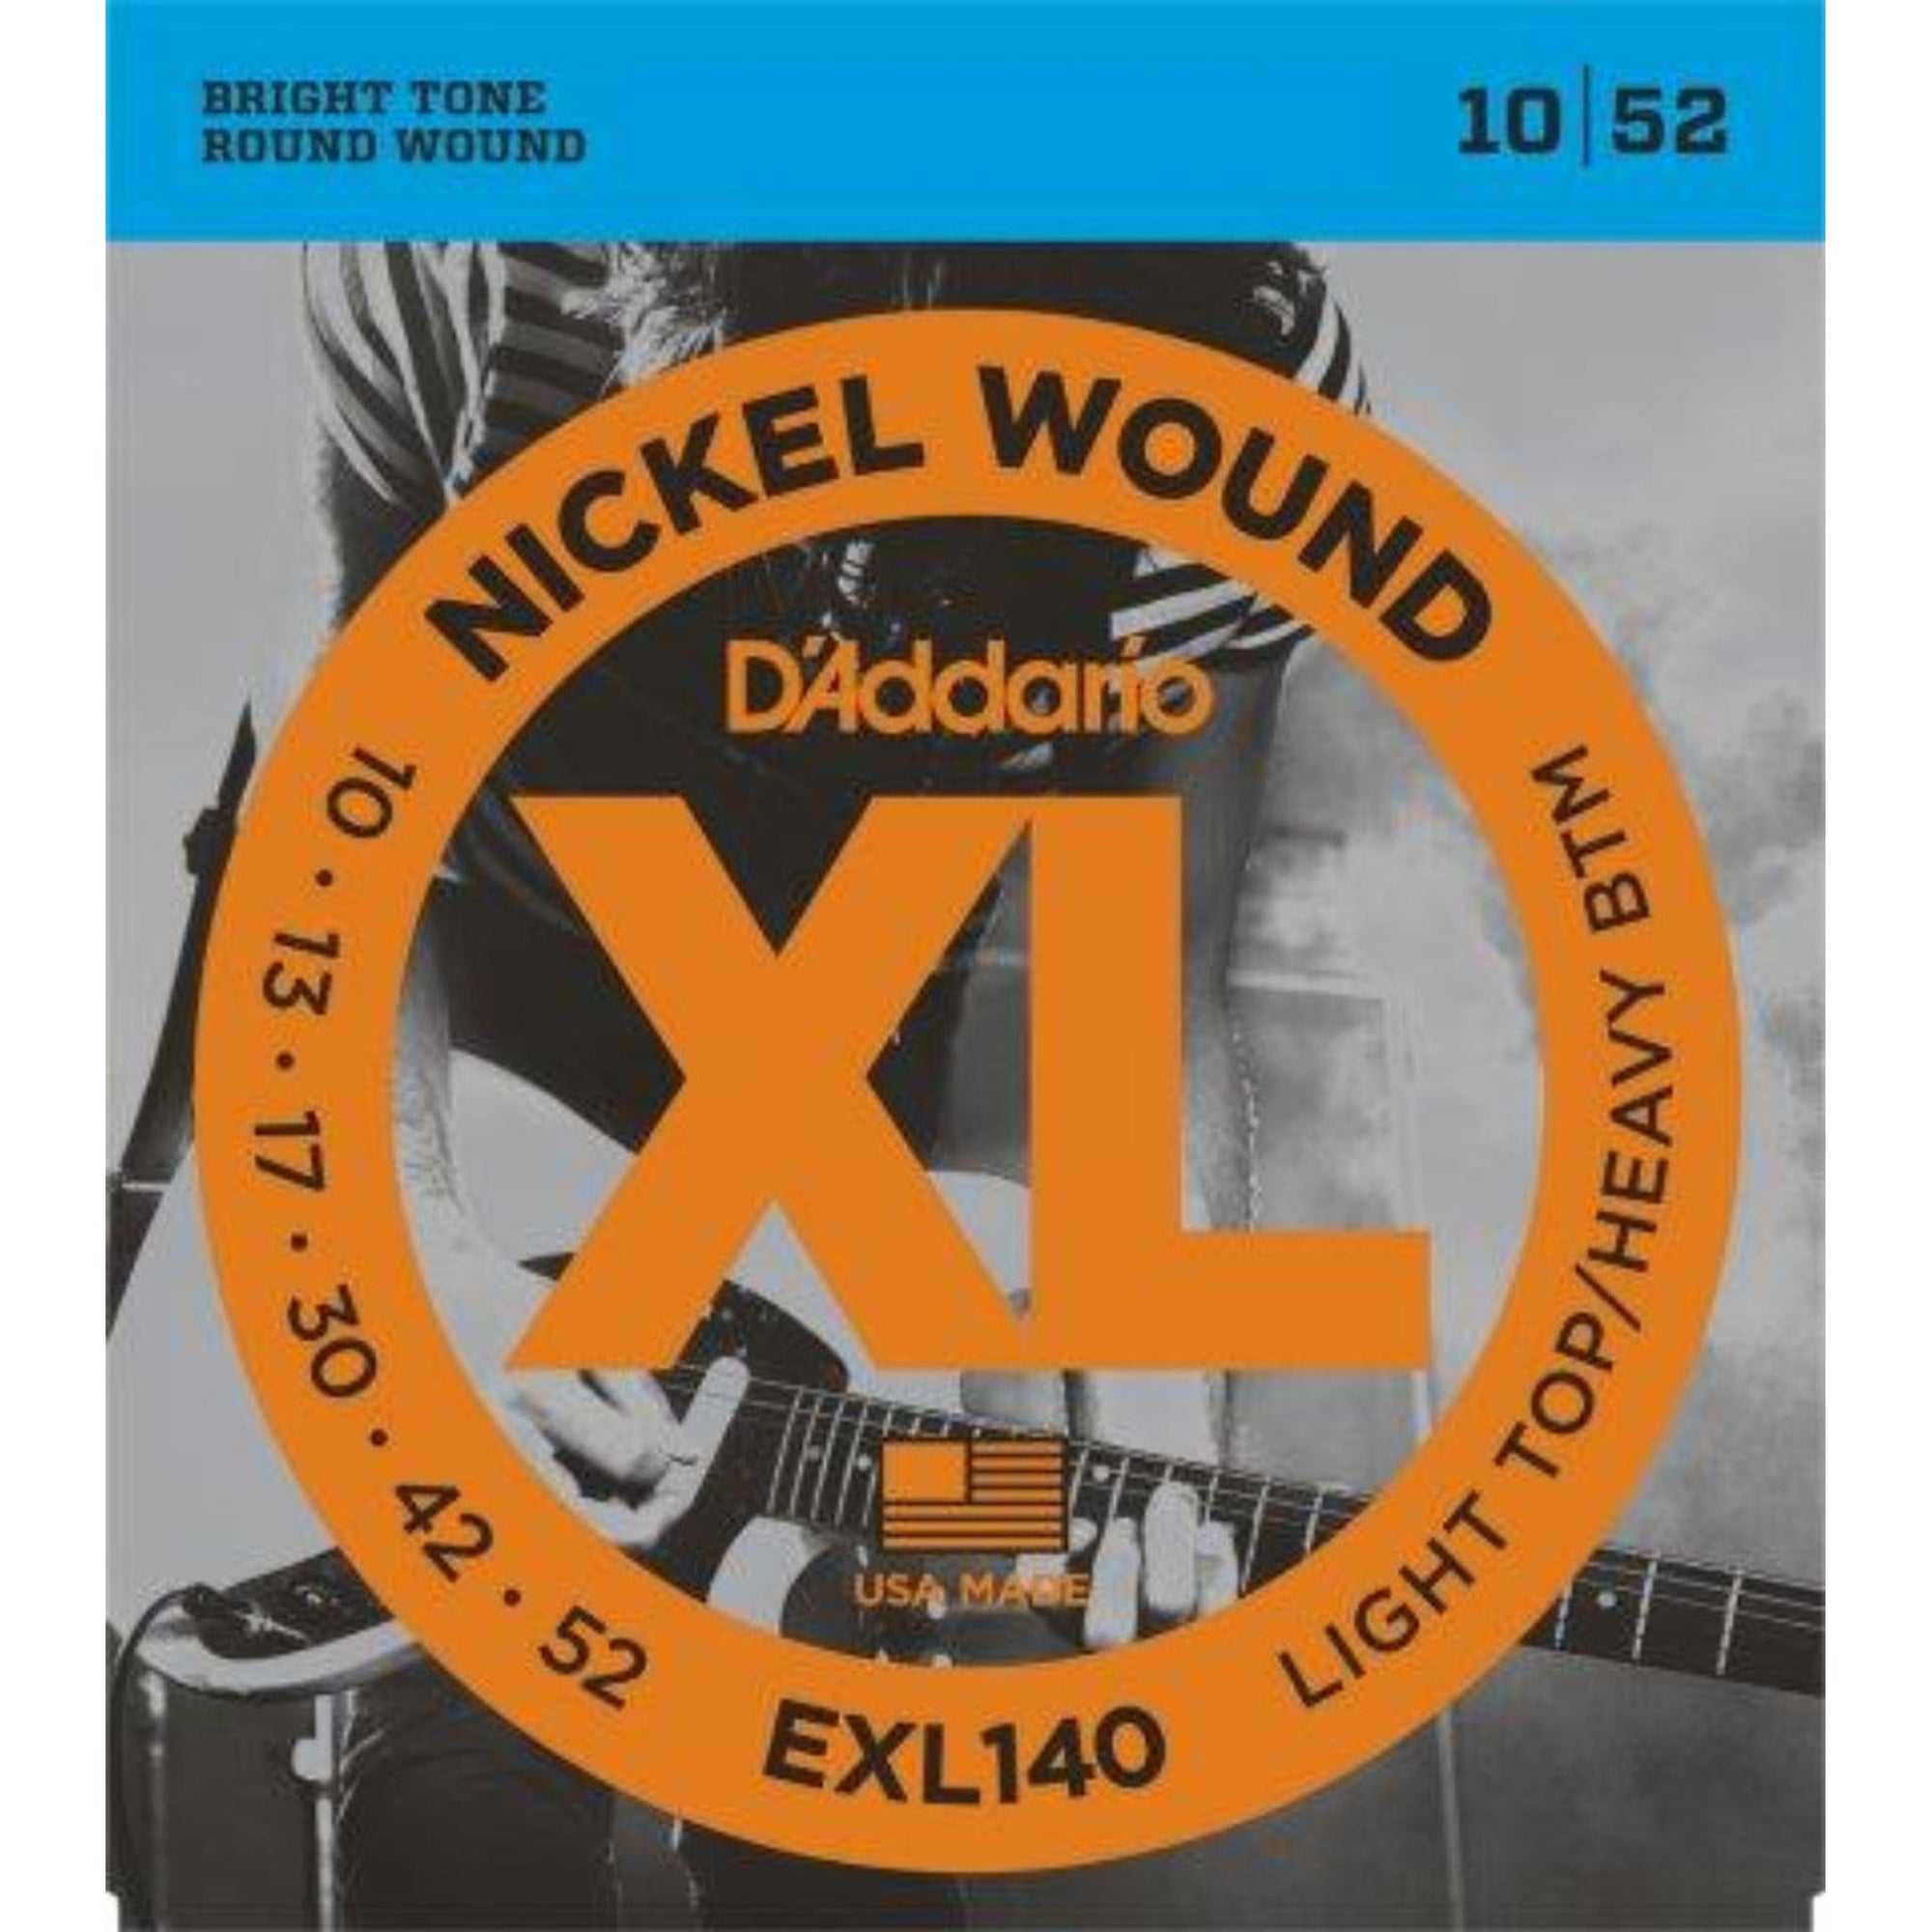 The D'Addario EXL140's is one of D'Addario's most popular hybrid sets. The combination of light highs and heavy lows delivers powerful low end for heavy chording and flexible plain steel strings for bending. Optimized for down or drop tuning!